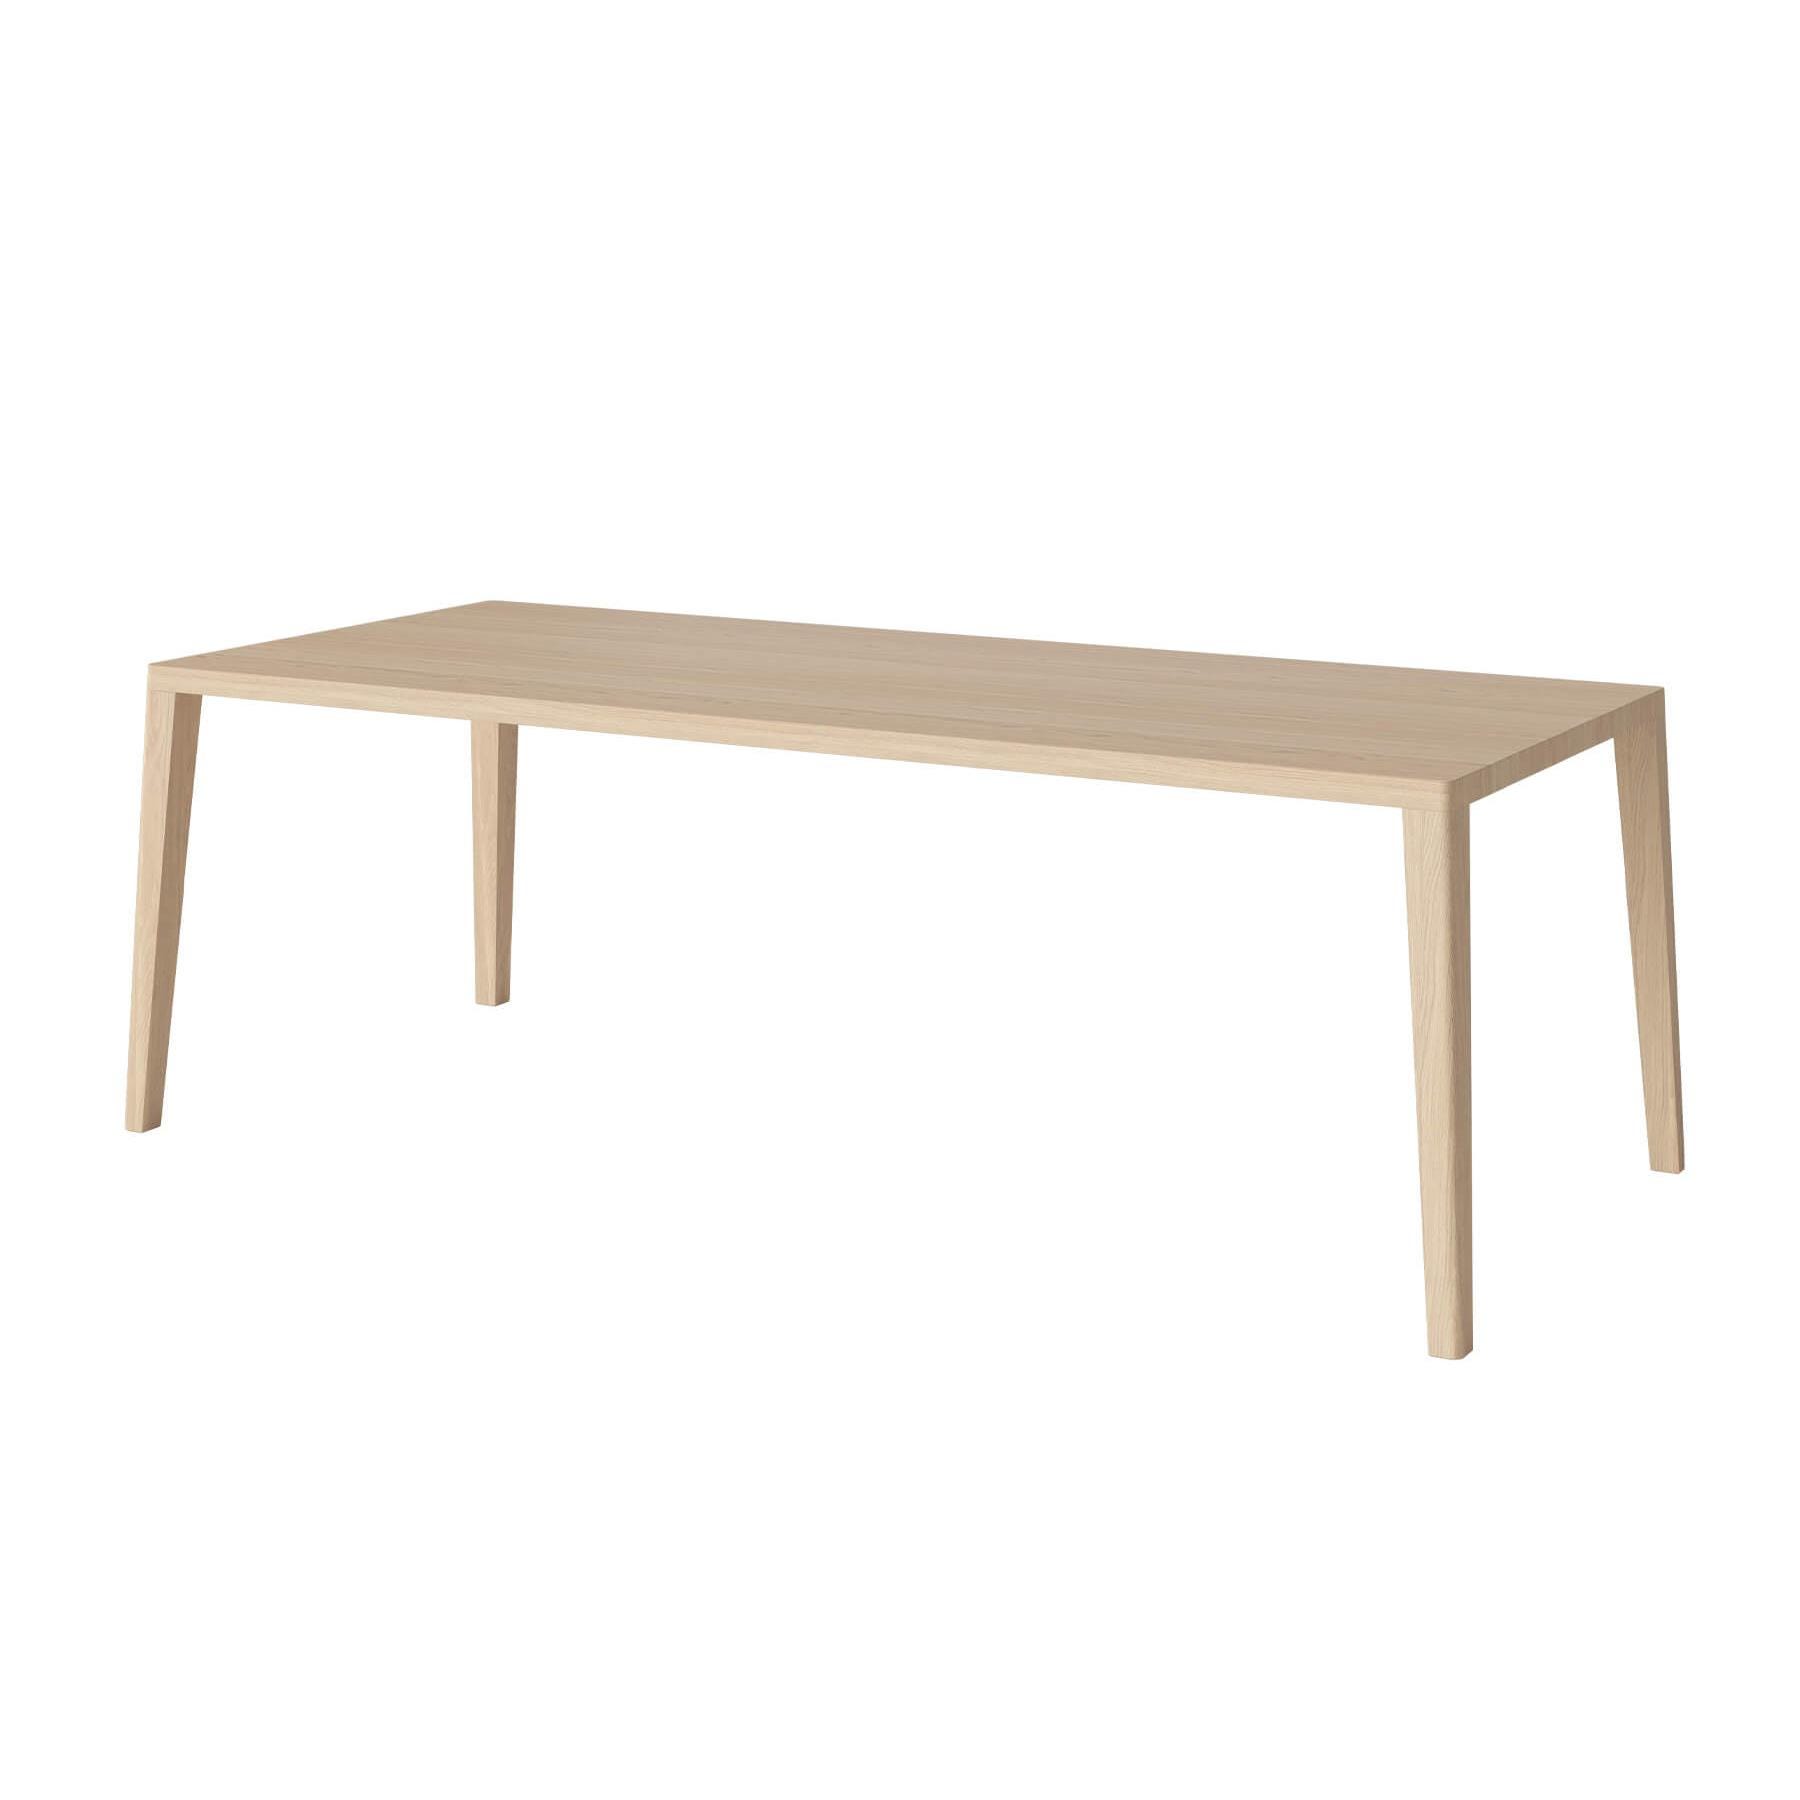 Bolia Graceful Dining Table 220 X 95cm White Oiled Legs With Extension Leaves Light Wood Designer Furniture From Holloways Of Ludlow